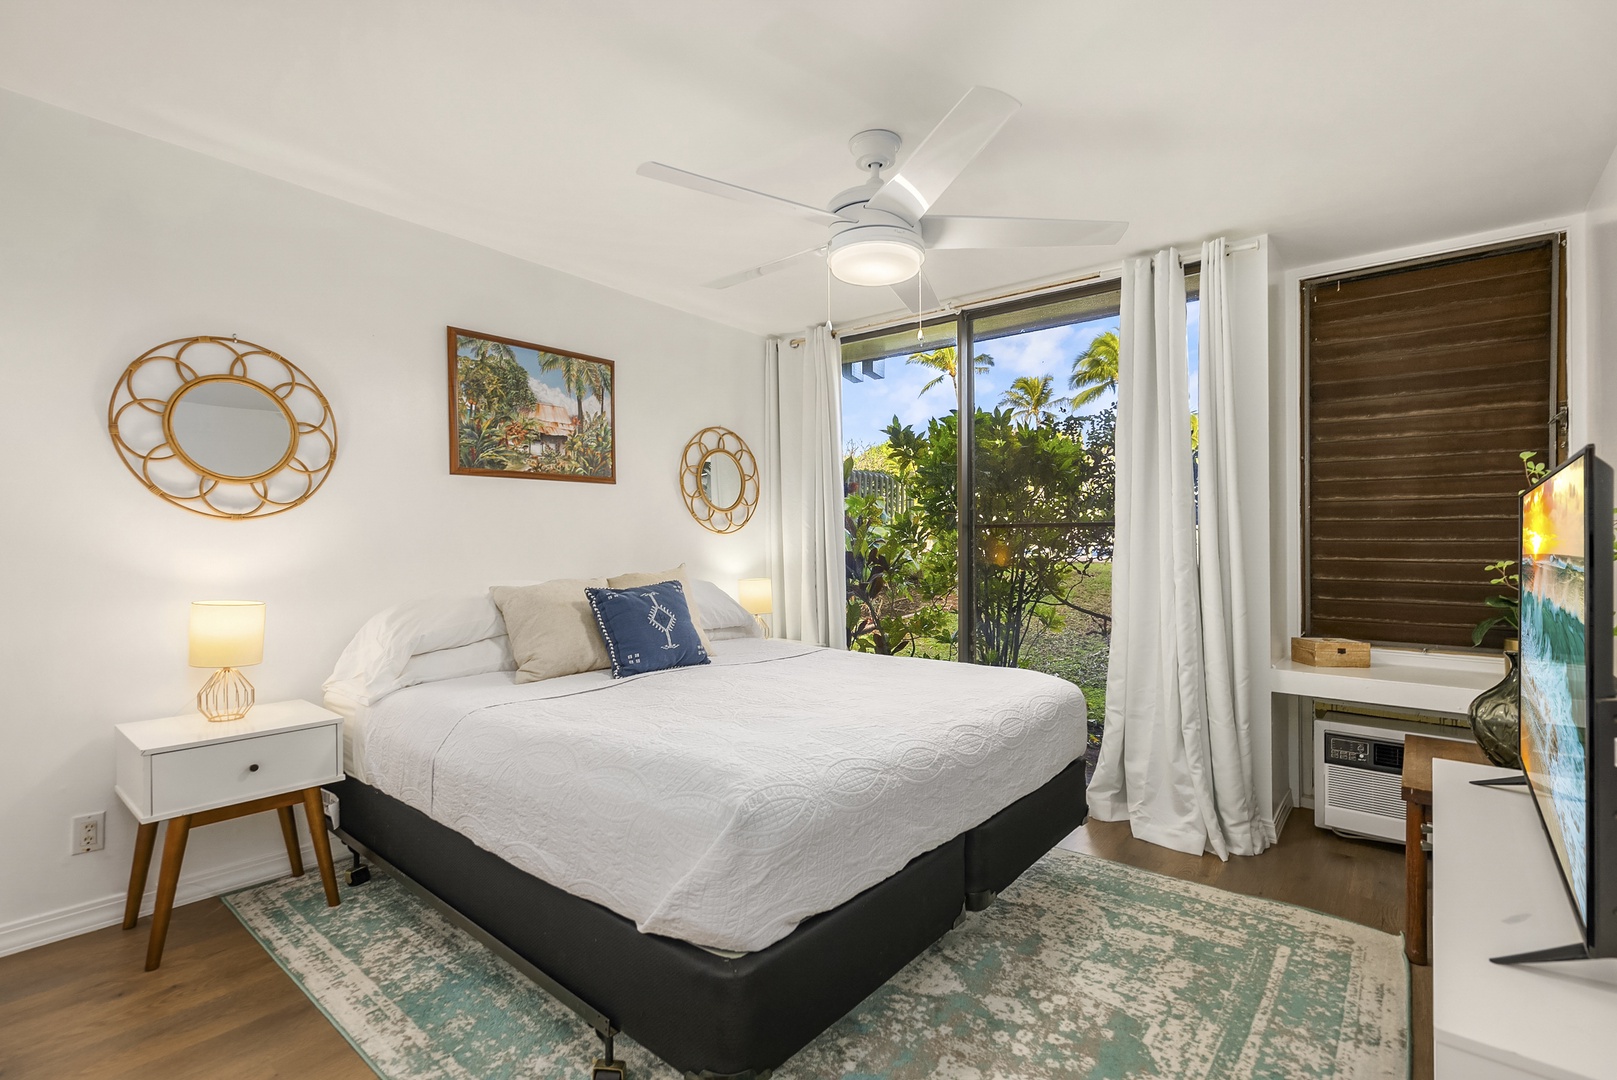 Kahuku Vacation Rentals, Pulelehua Kuilima Estates West #142 - Bedroom with a California King sized bed